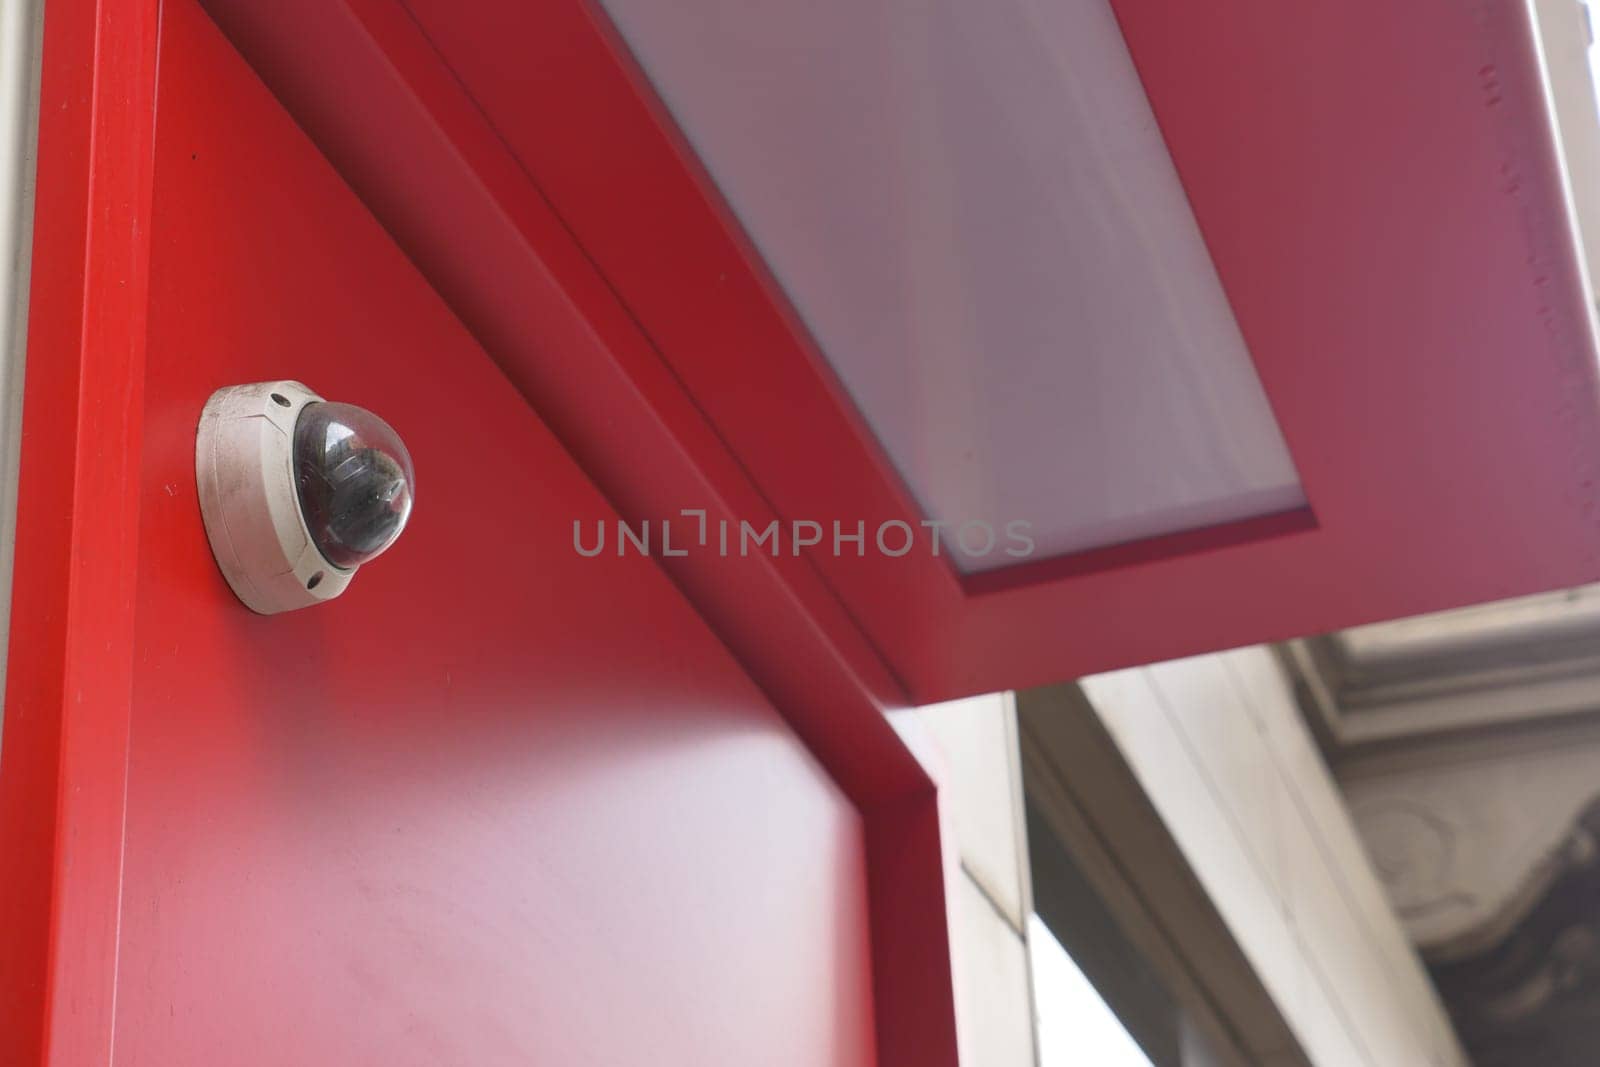 CCTV security camera operating on atm booth by towfiq007